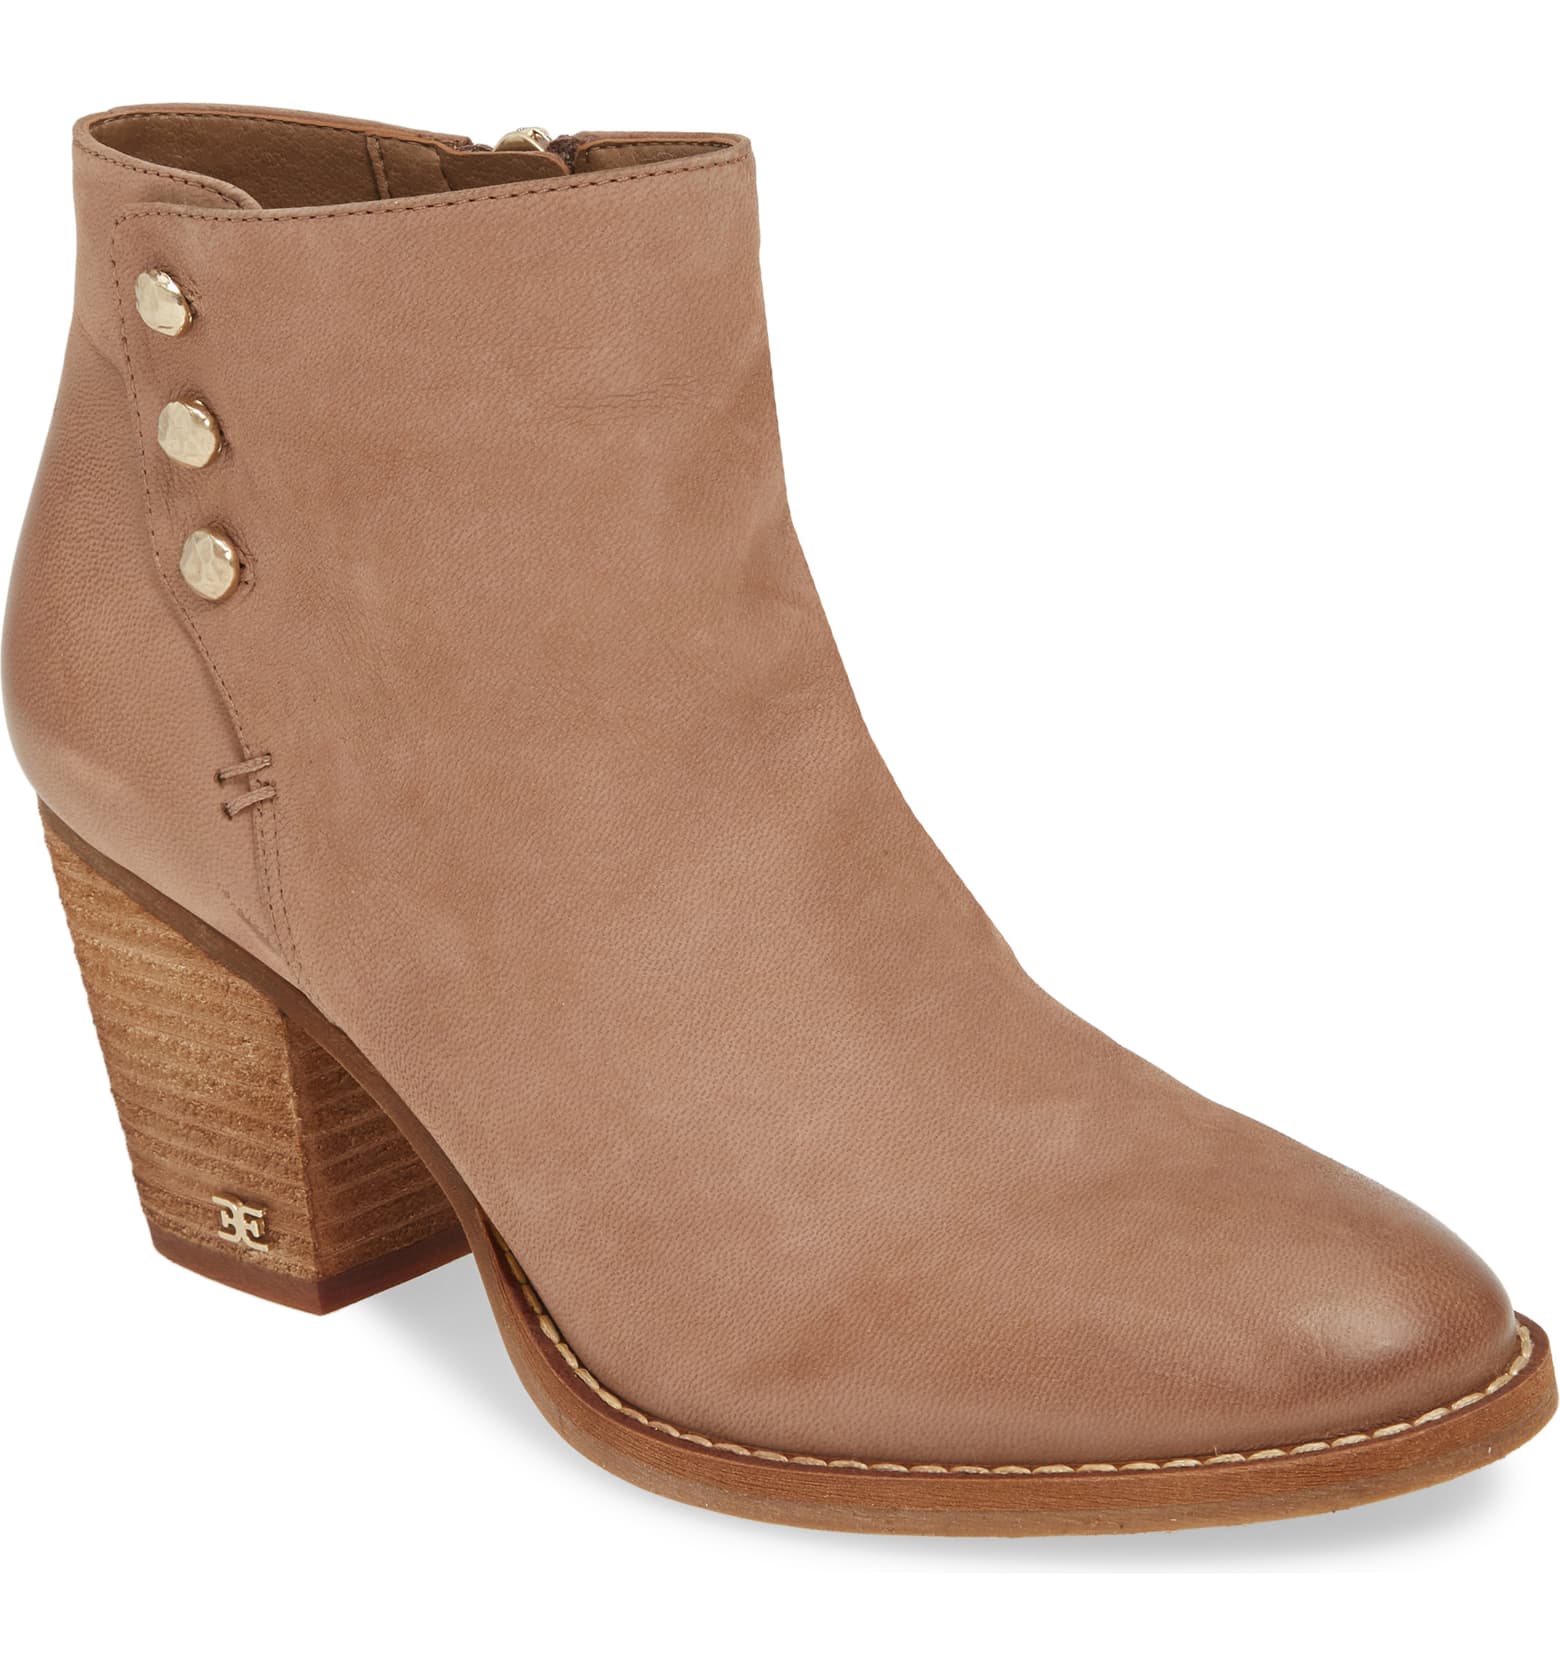 Sam Edelman Booties from the Nordstrom Sale